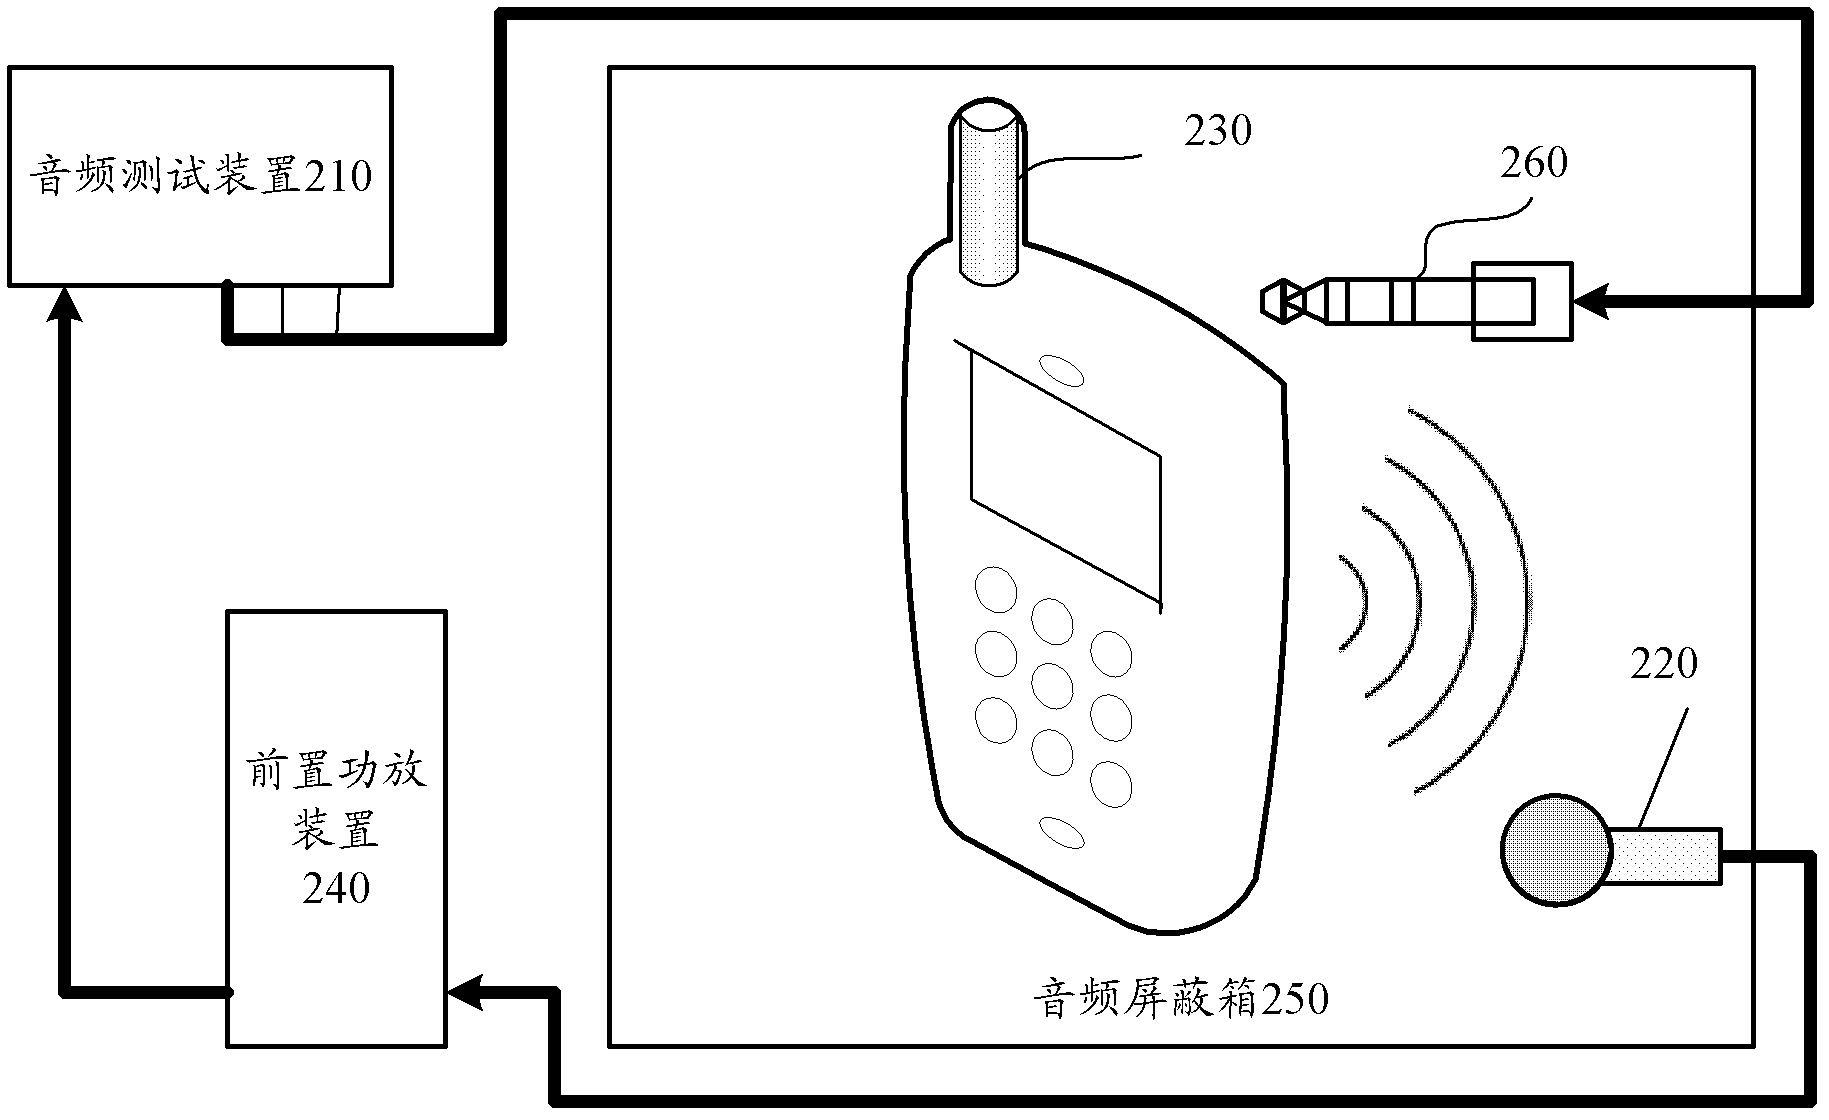 Audio test method and system for earphone microphone and receiver of mobile terminal